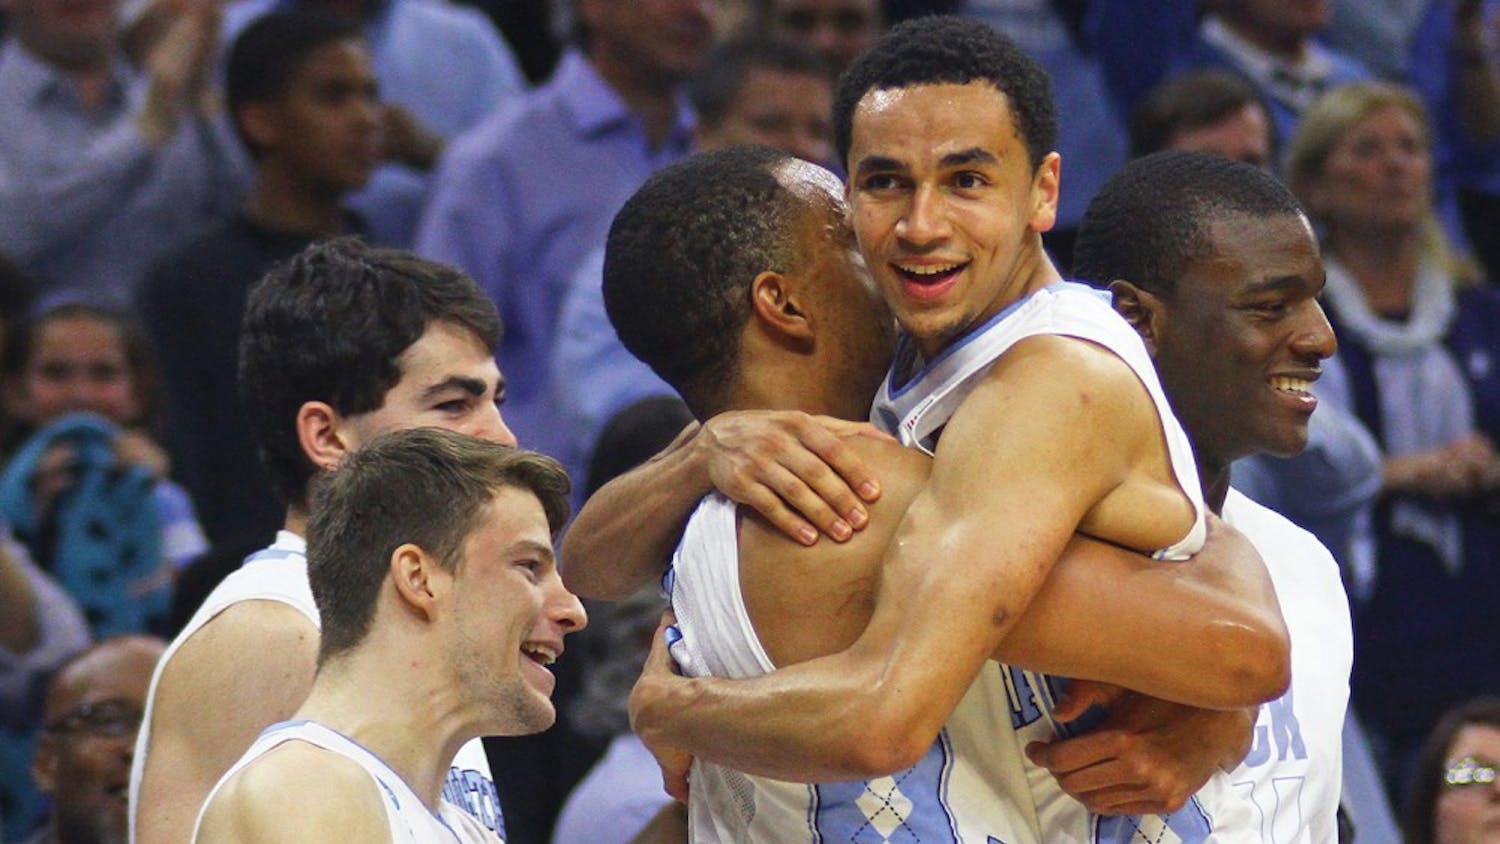 North Carolina seniors Brice Johnson (left) &nbsp;and Marcus Paige (right) embrace after winning a spot into the Final Four by defeating Notre Dame 88-74 at the Wells Fargo Center in Philadelphia.&nbsp;